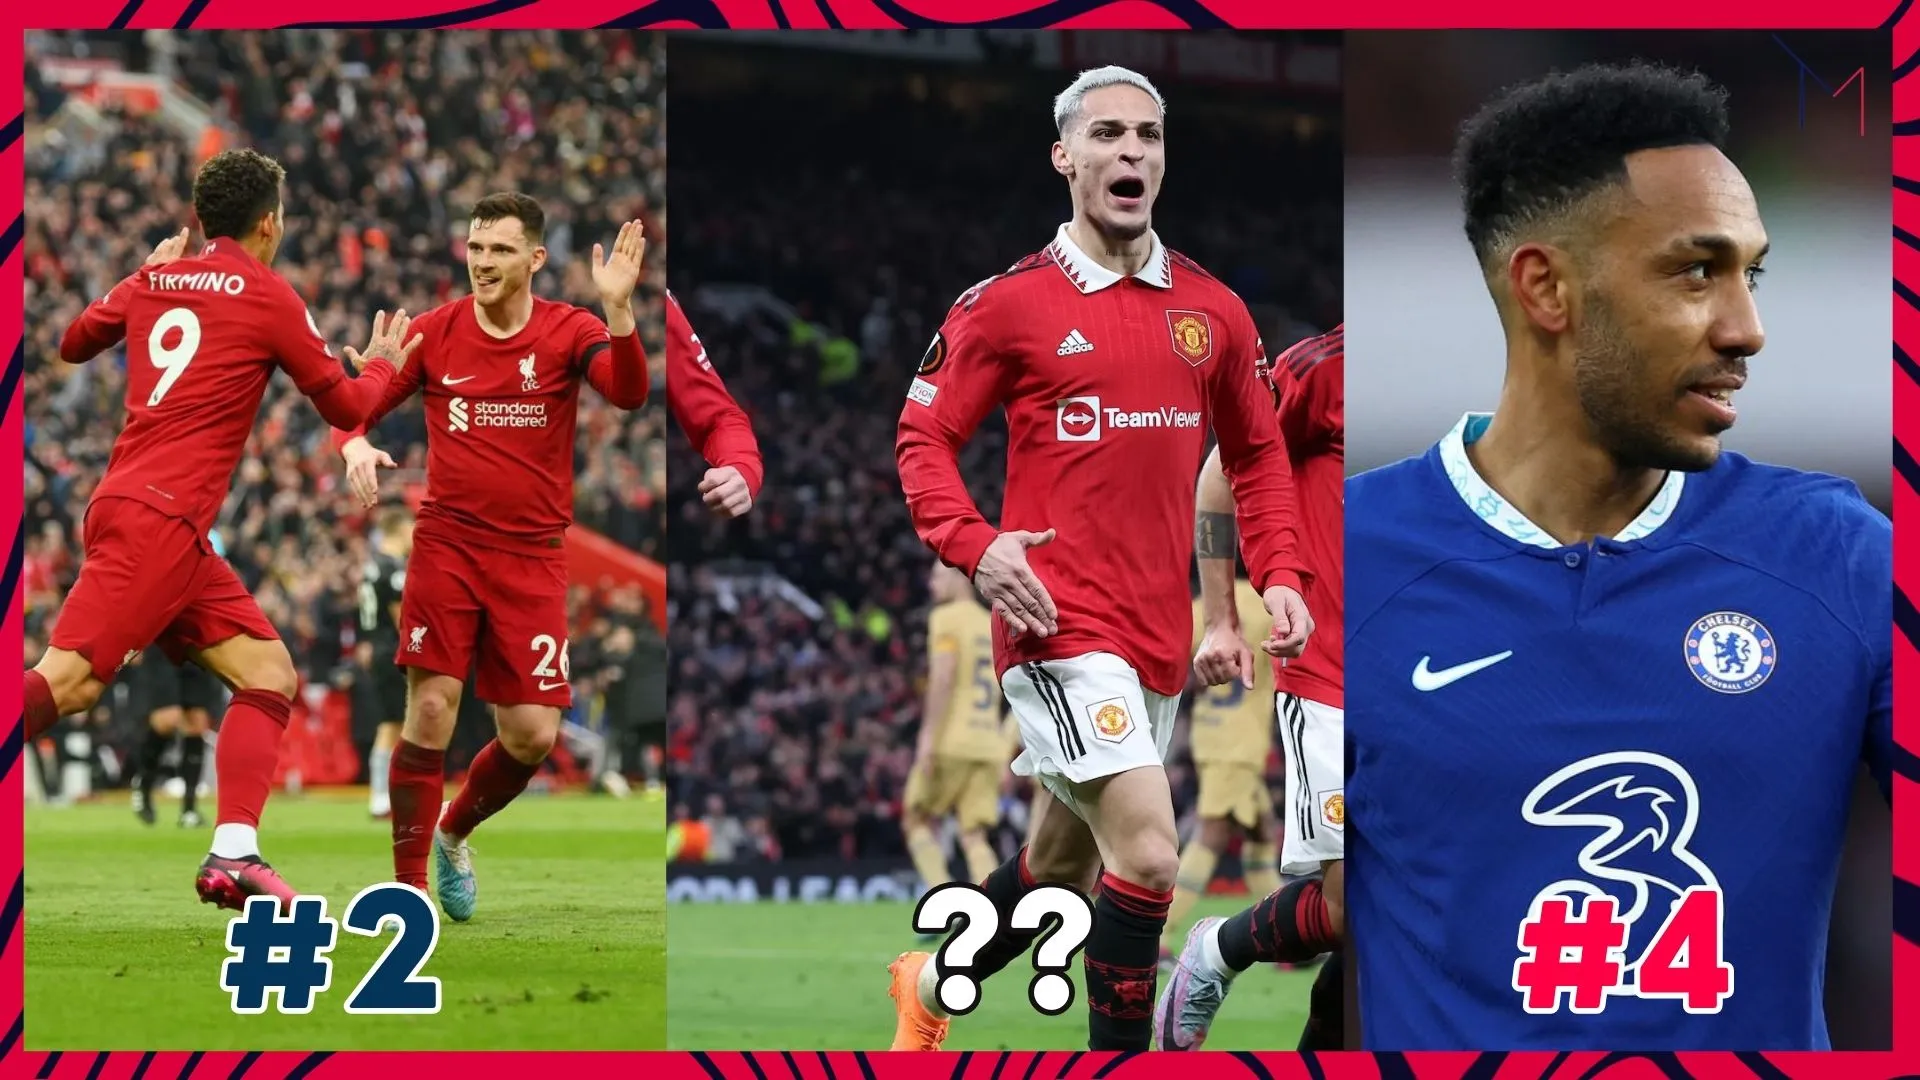 10 most popular Premier League teams in the world - Popular teams in the Premier League